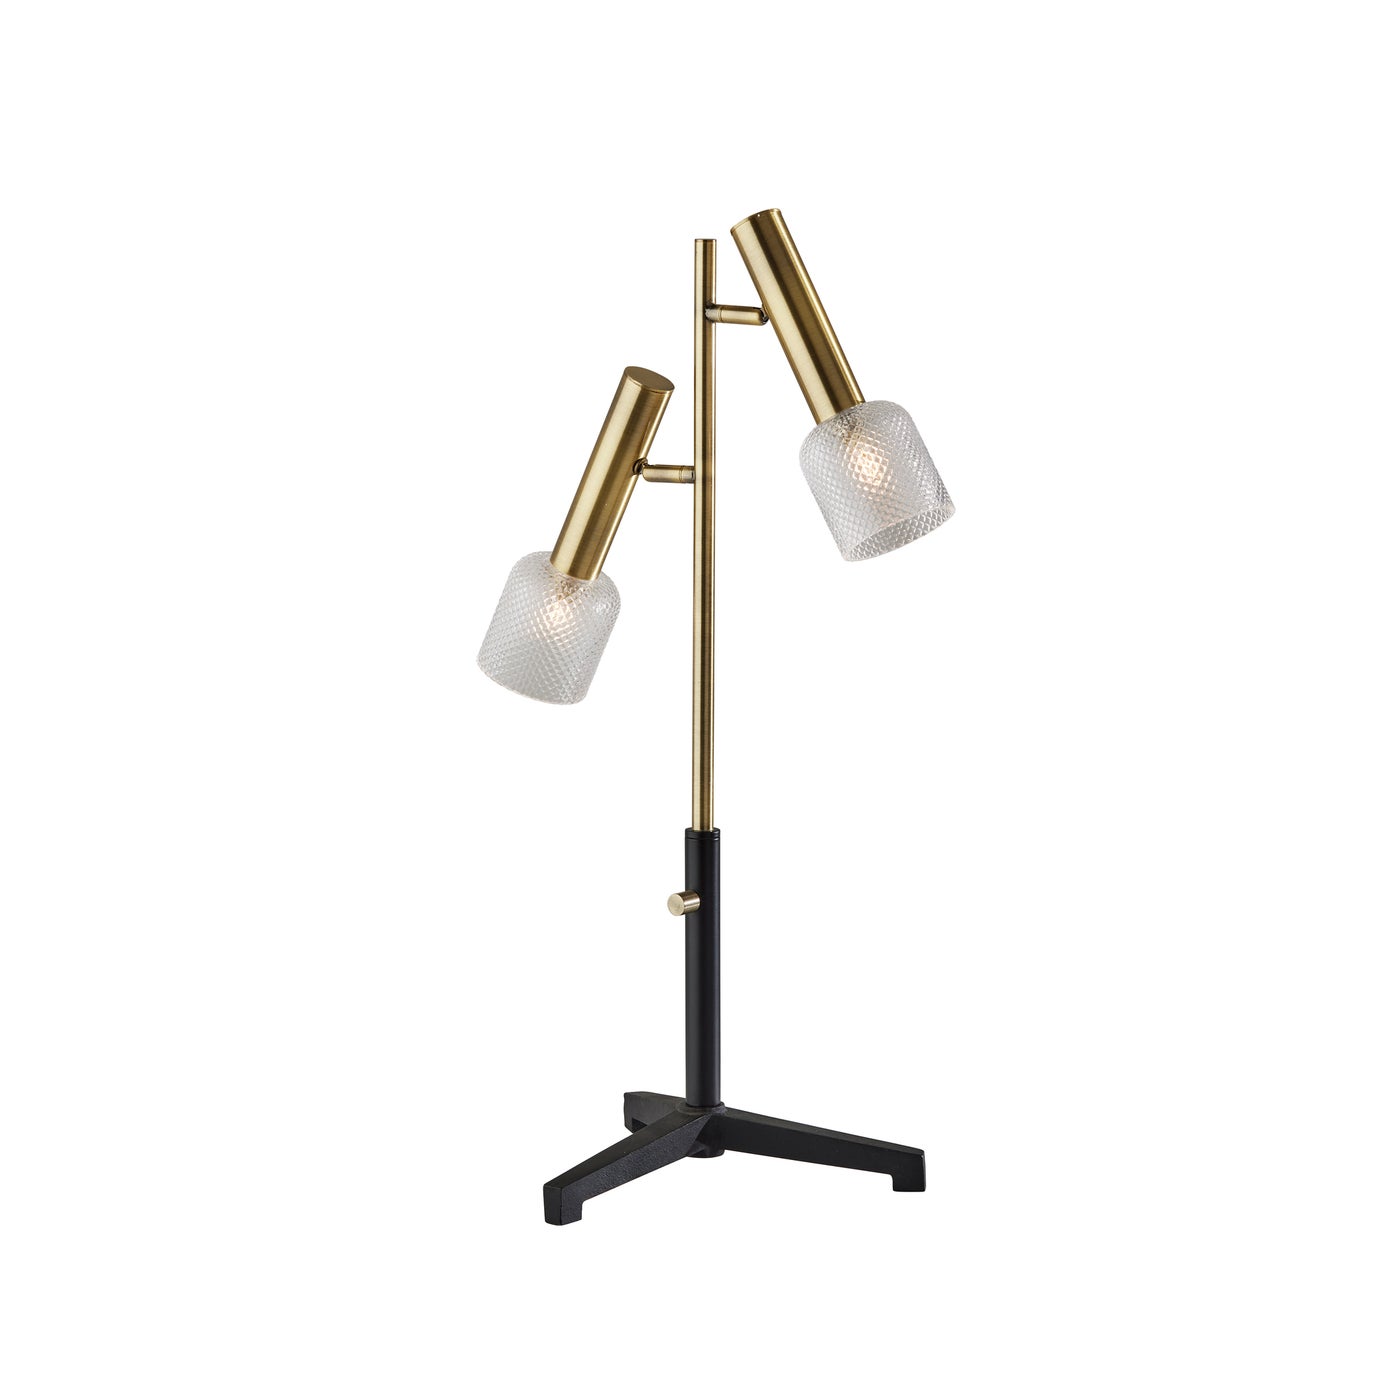 Adesso Home - 3551-21 - LED Table Lamp - Melvin - Black & Antique Brass